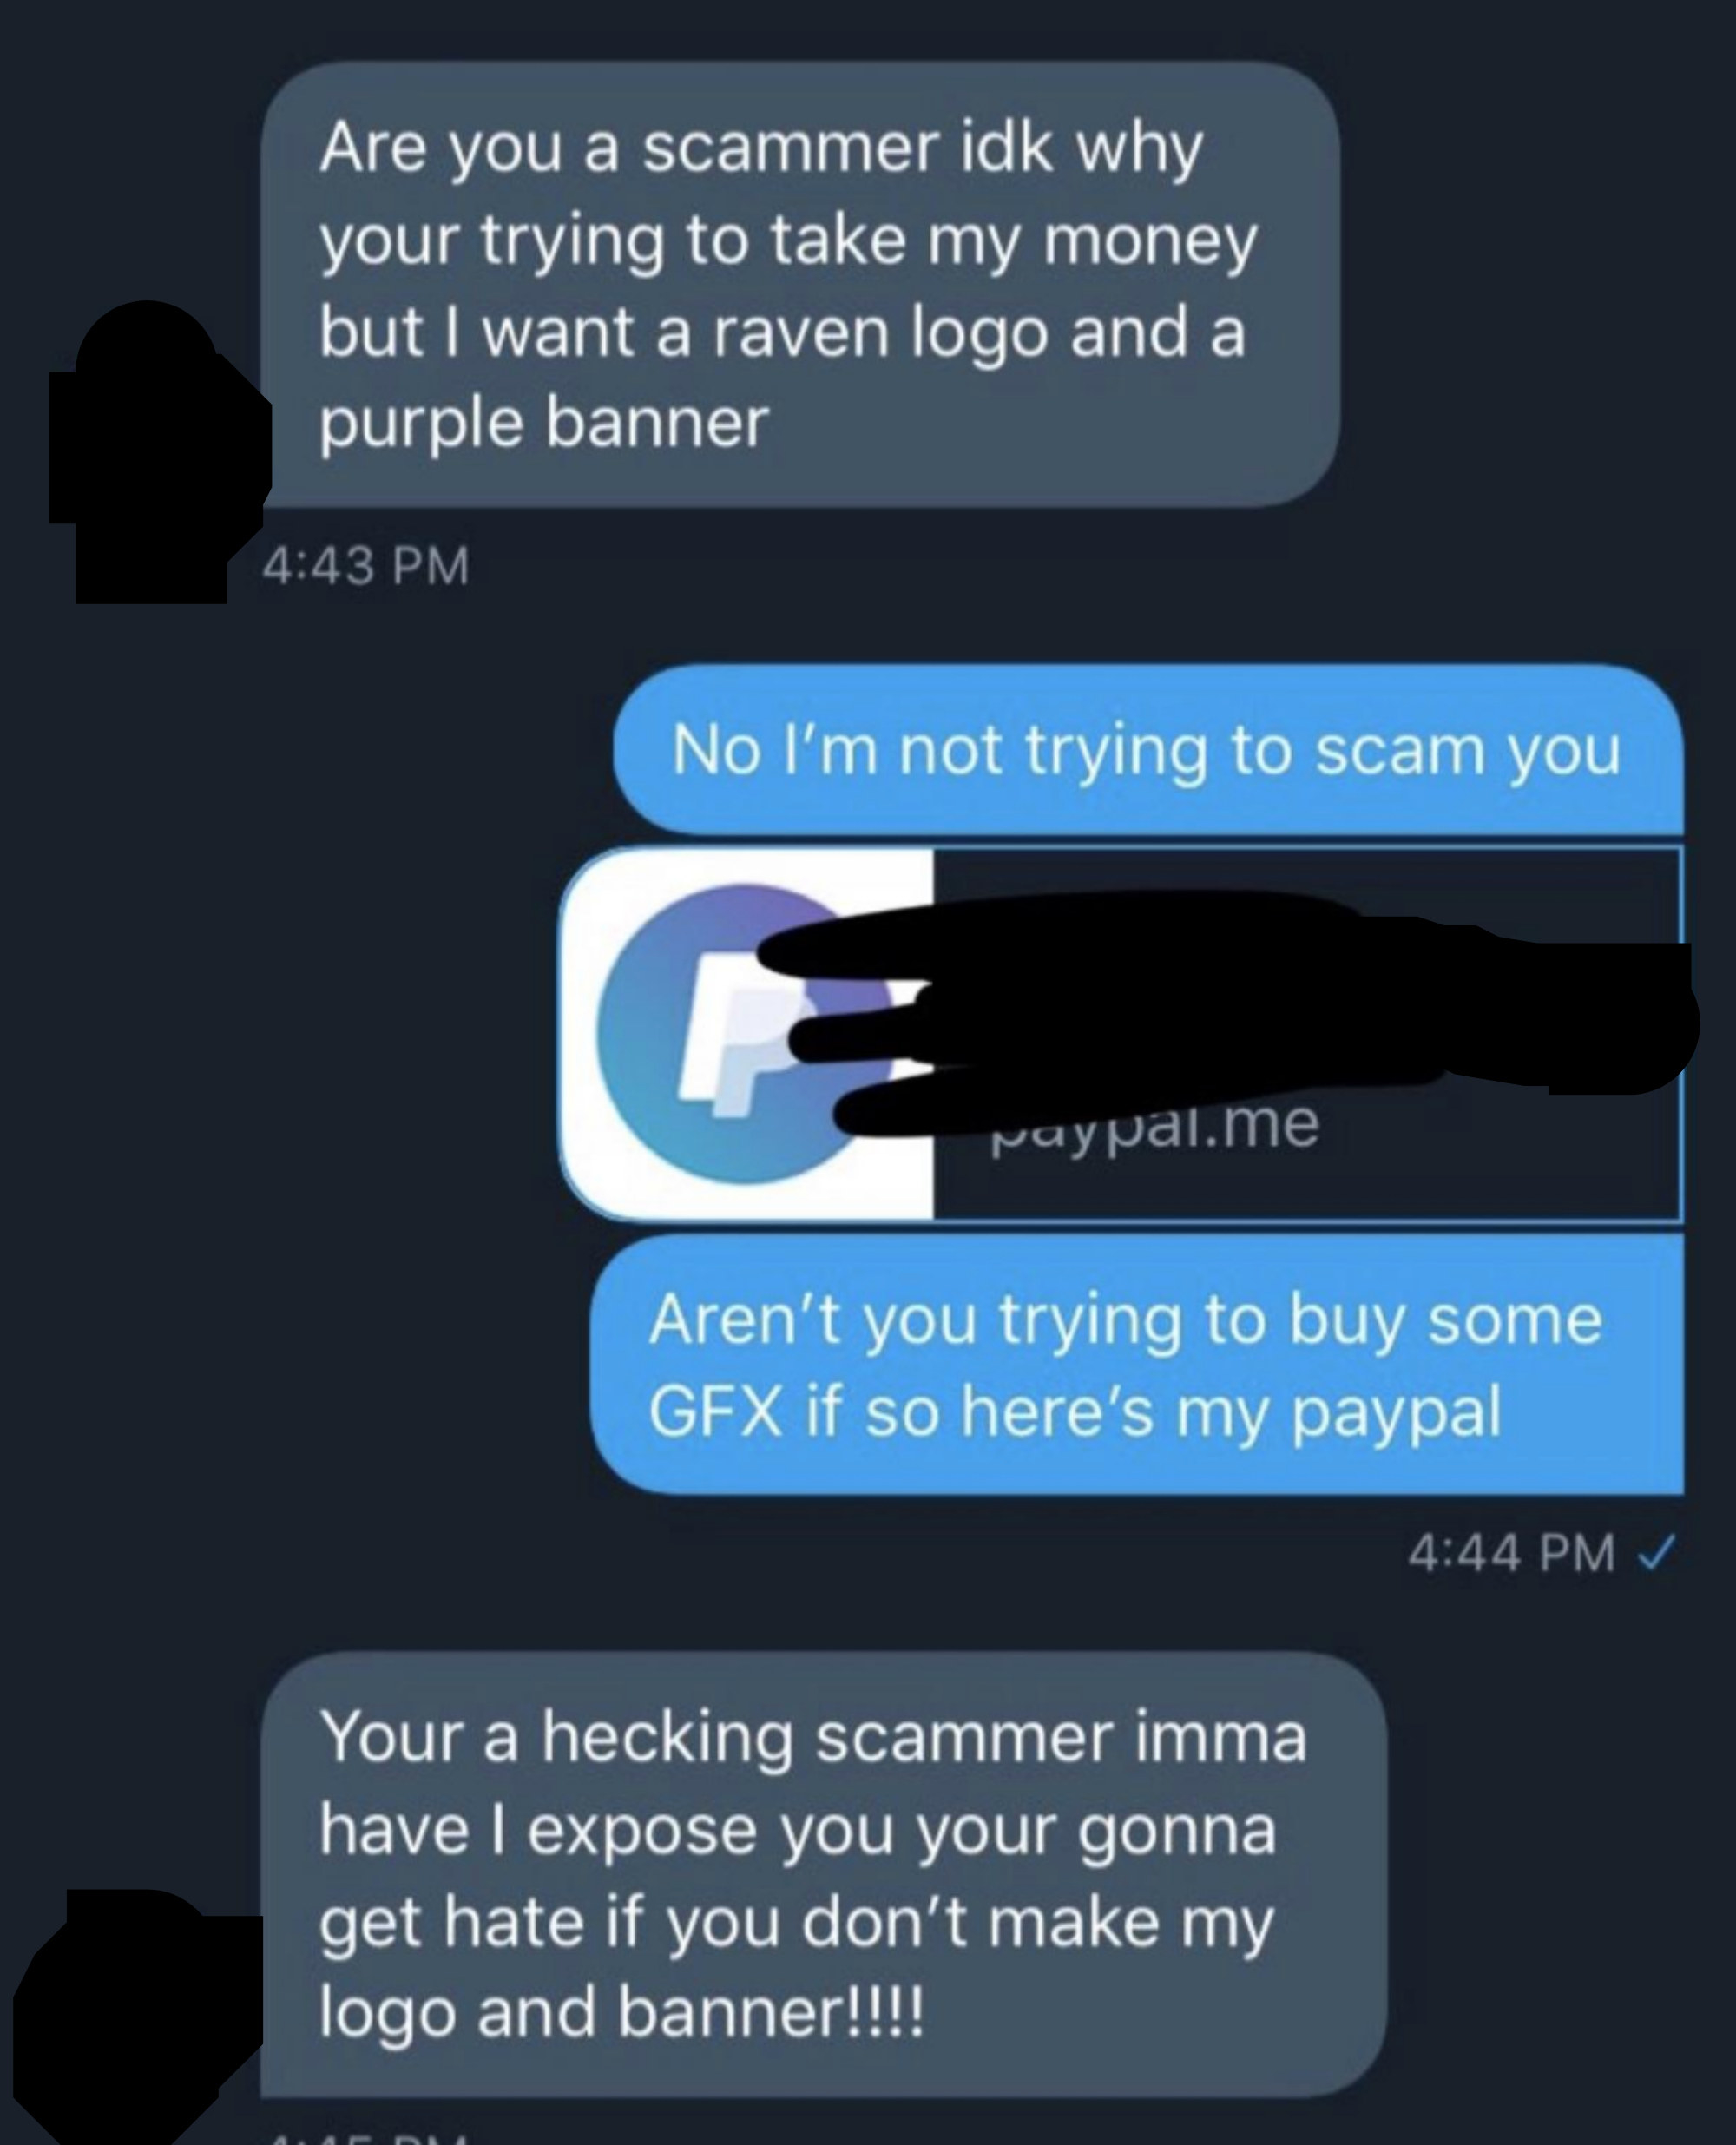 a scammer sending a paypal account after not sending someone the logo and banner they said they&#x27;d make